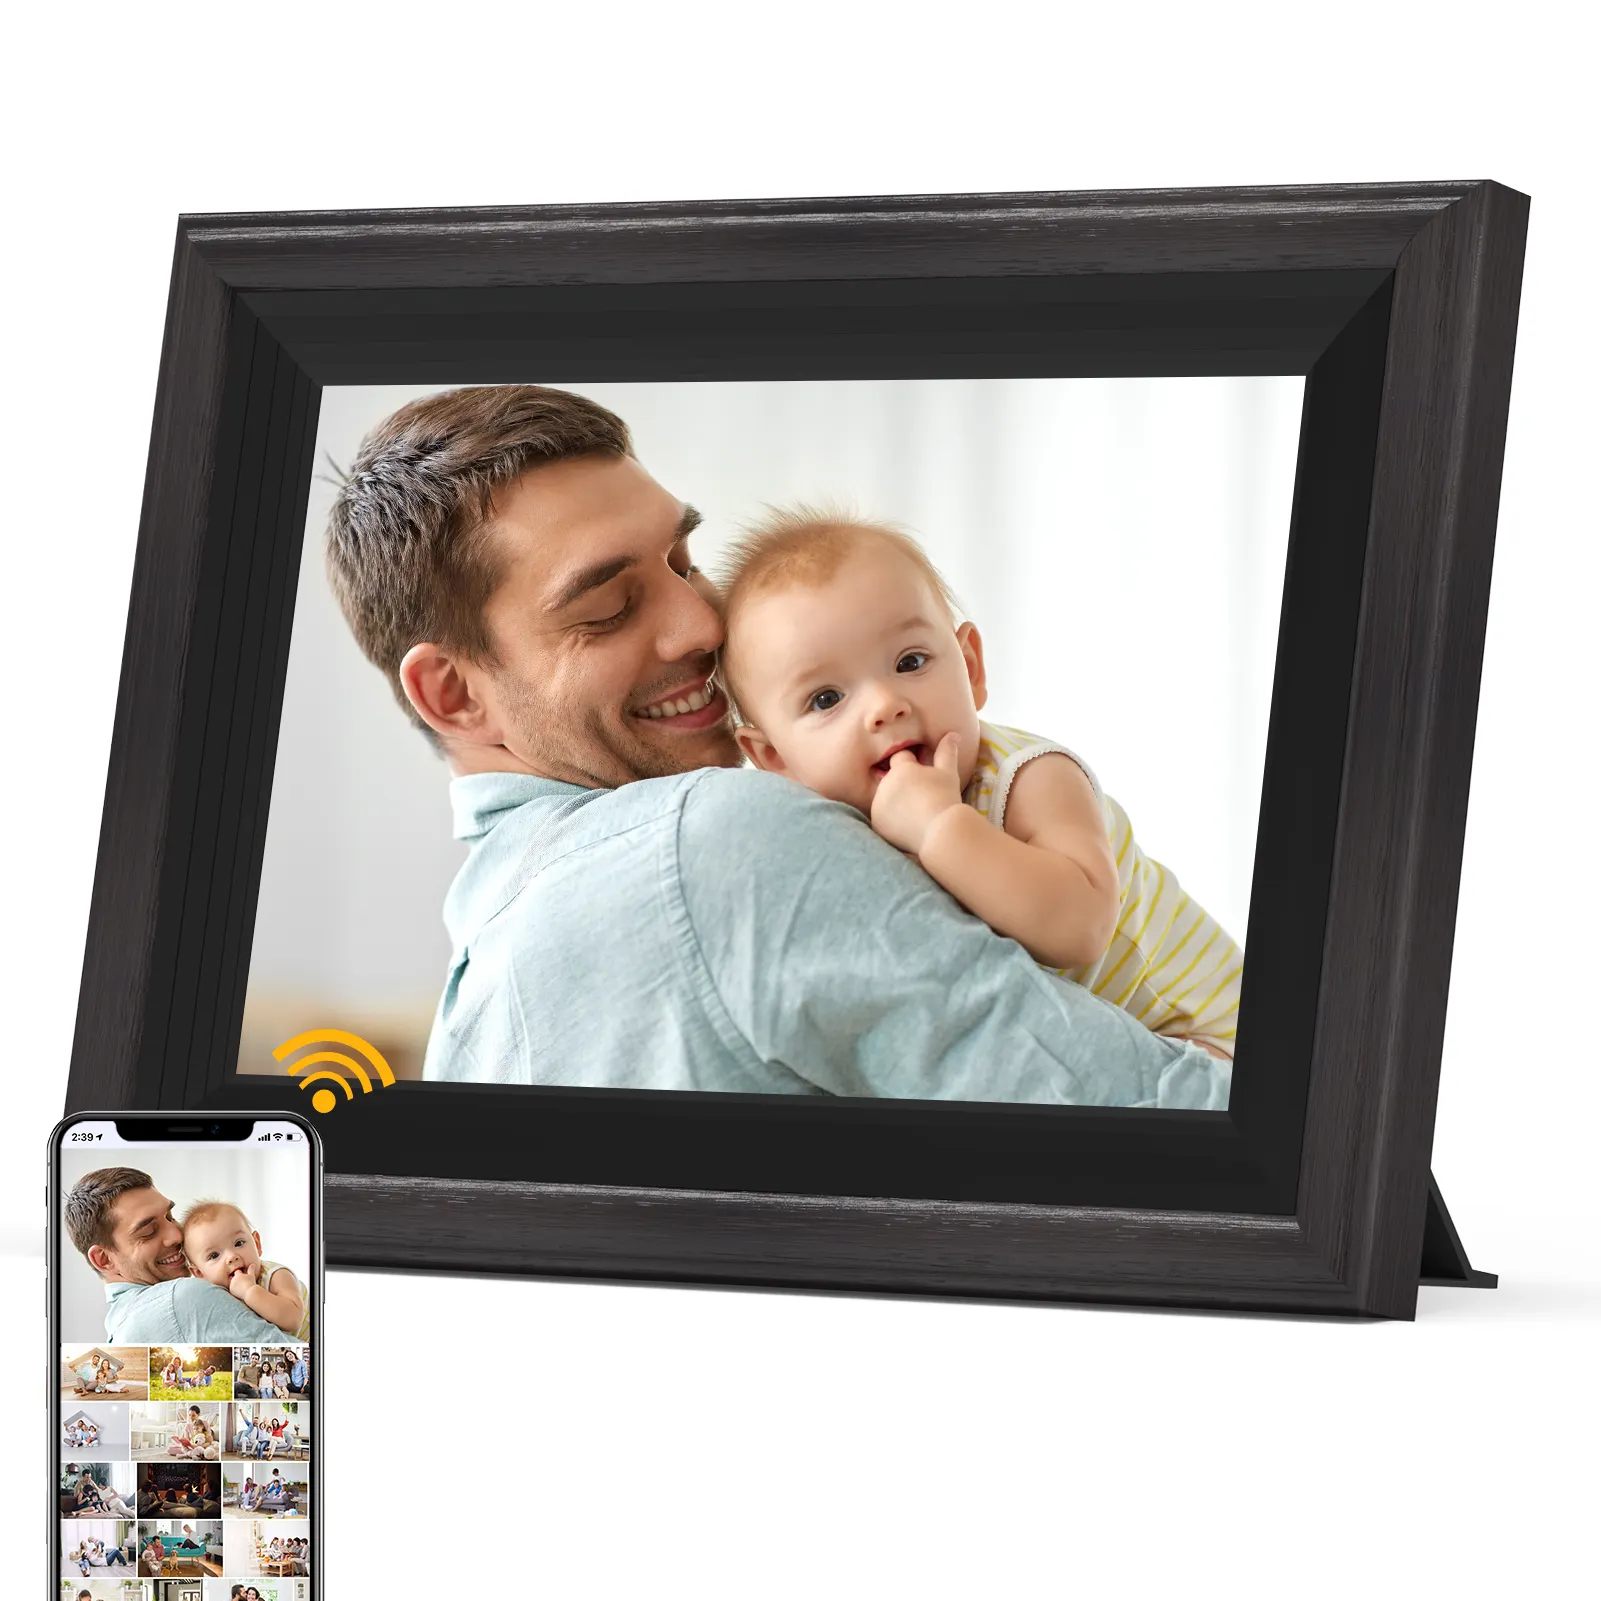 Download free mp3 mp4 calendar led a3 a4 plastic video playback 10 inch digital photo frame